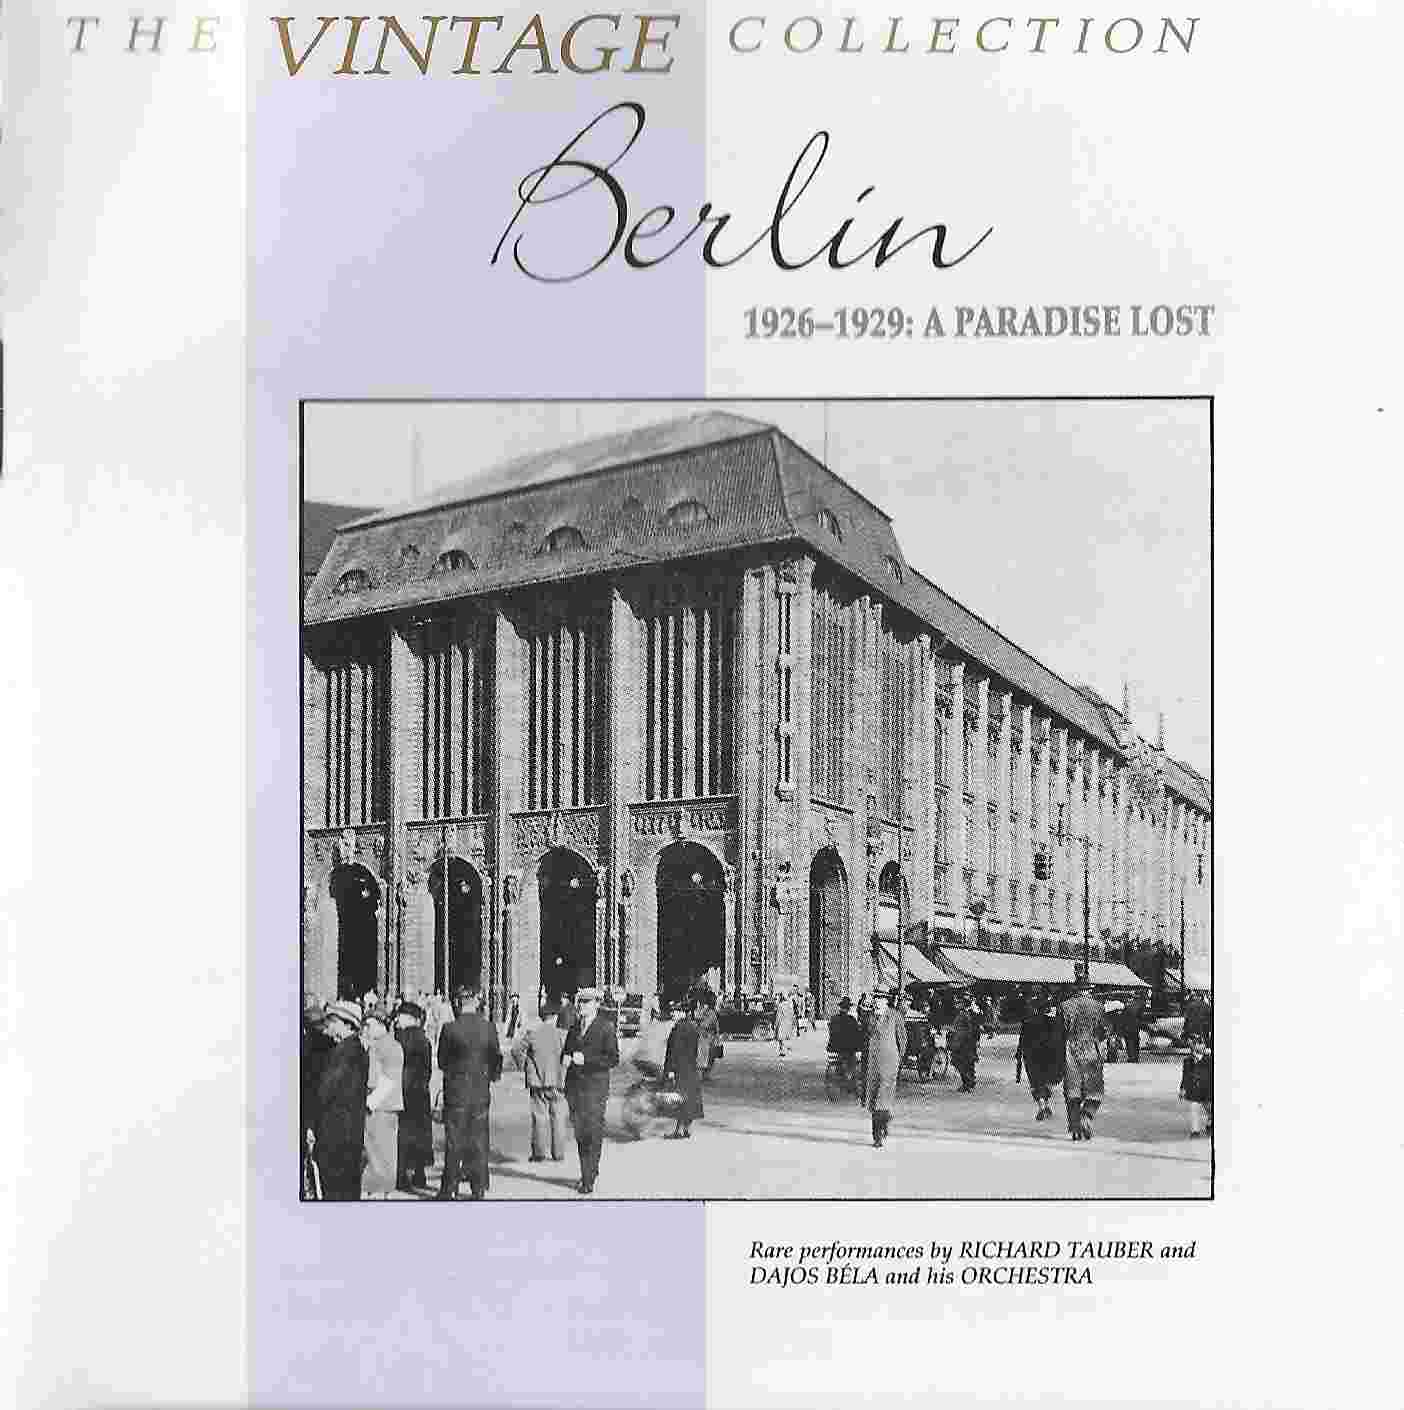 Picture of BBCCD754 The vintage collection - Berlin 1926 - 1929 by artist Various from the BBC cds - Records and Tapes library